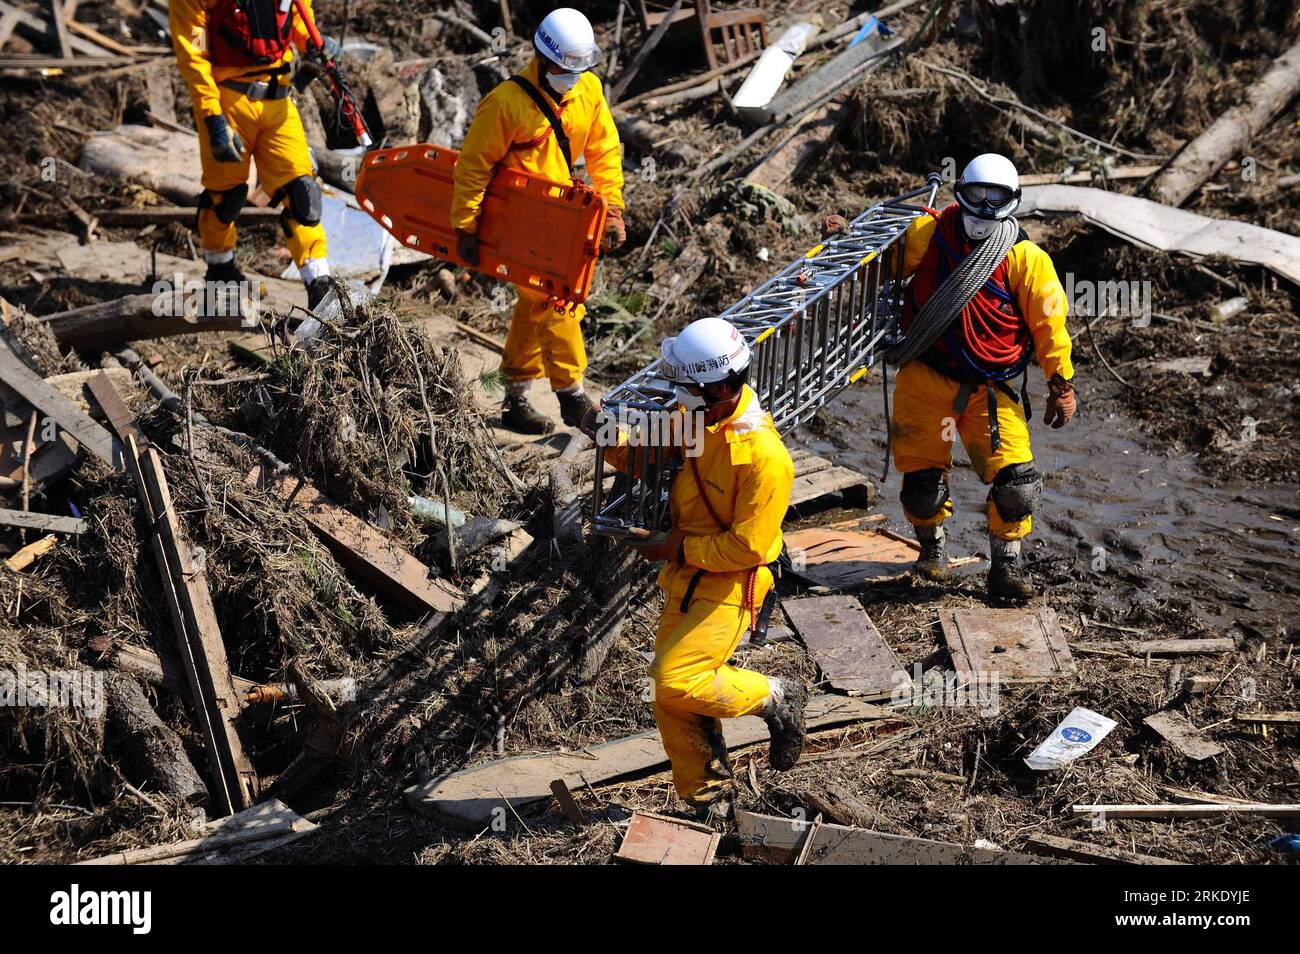 Bildnummer: 55019325  Datum: 13.03.2011  Copyright: imago/Xinhua SENDAI, March 13, 2011 (Xinhua) -- Rescuers search for survivors at Sanbontsuka of Wakabayashi in Sendai City, Miyagi Prefecture, Japan, March 13, 2011. The area lost contact with the outside world after Friday s quake and tsunami. Friday s catastrophic earthquake in Japan and the following devastating tsunami have ravaged the country, while massive rescue and recovery efforts have been quickly launched to save lives and minimize losses. (Xinhua/Ji Chunpeng)(yc) JAPAN-QUAKE PUBLICATIONxNOTxINxCHN Gesellschaft Naturkatastrophe Erd Stock Photo